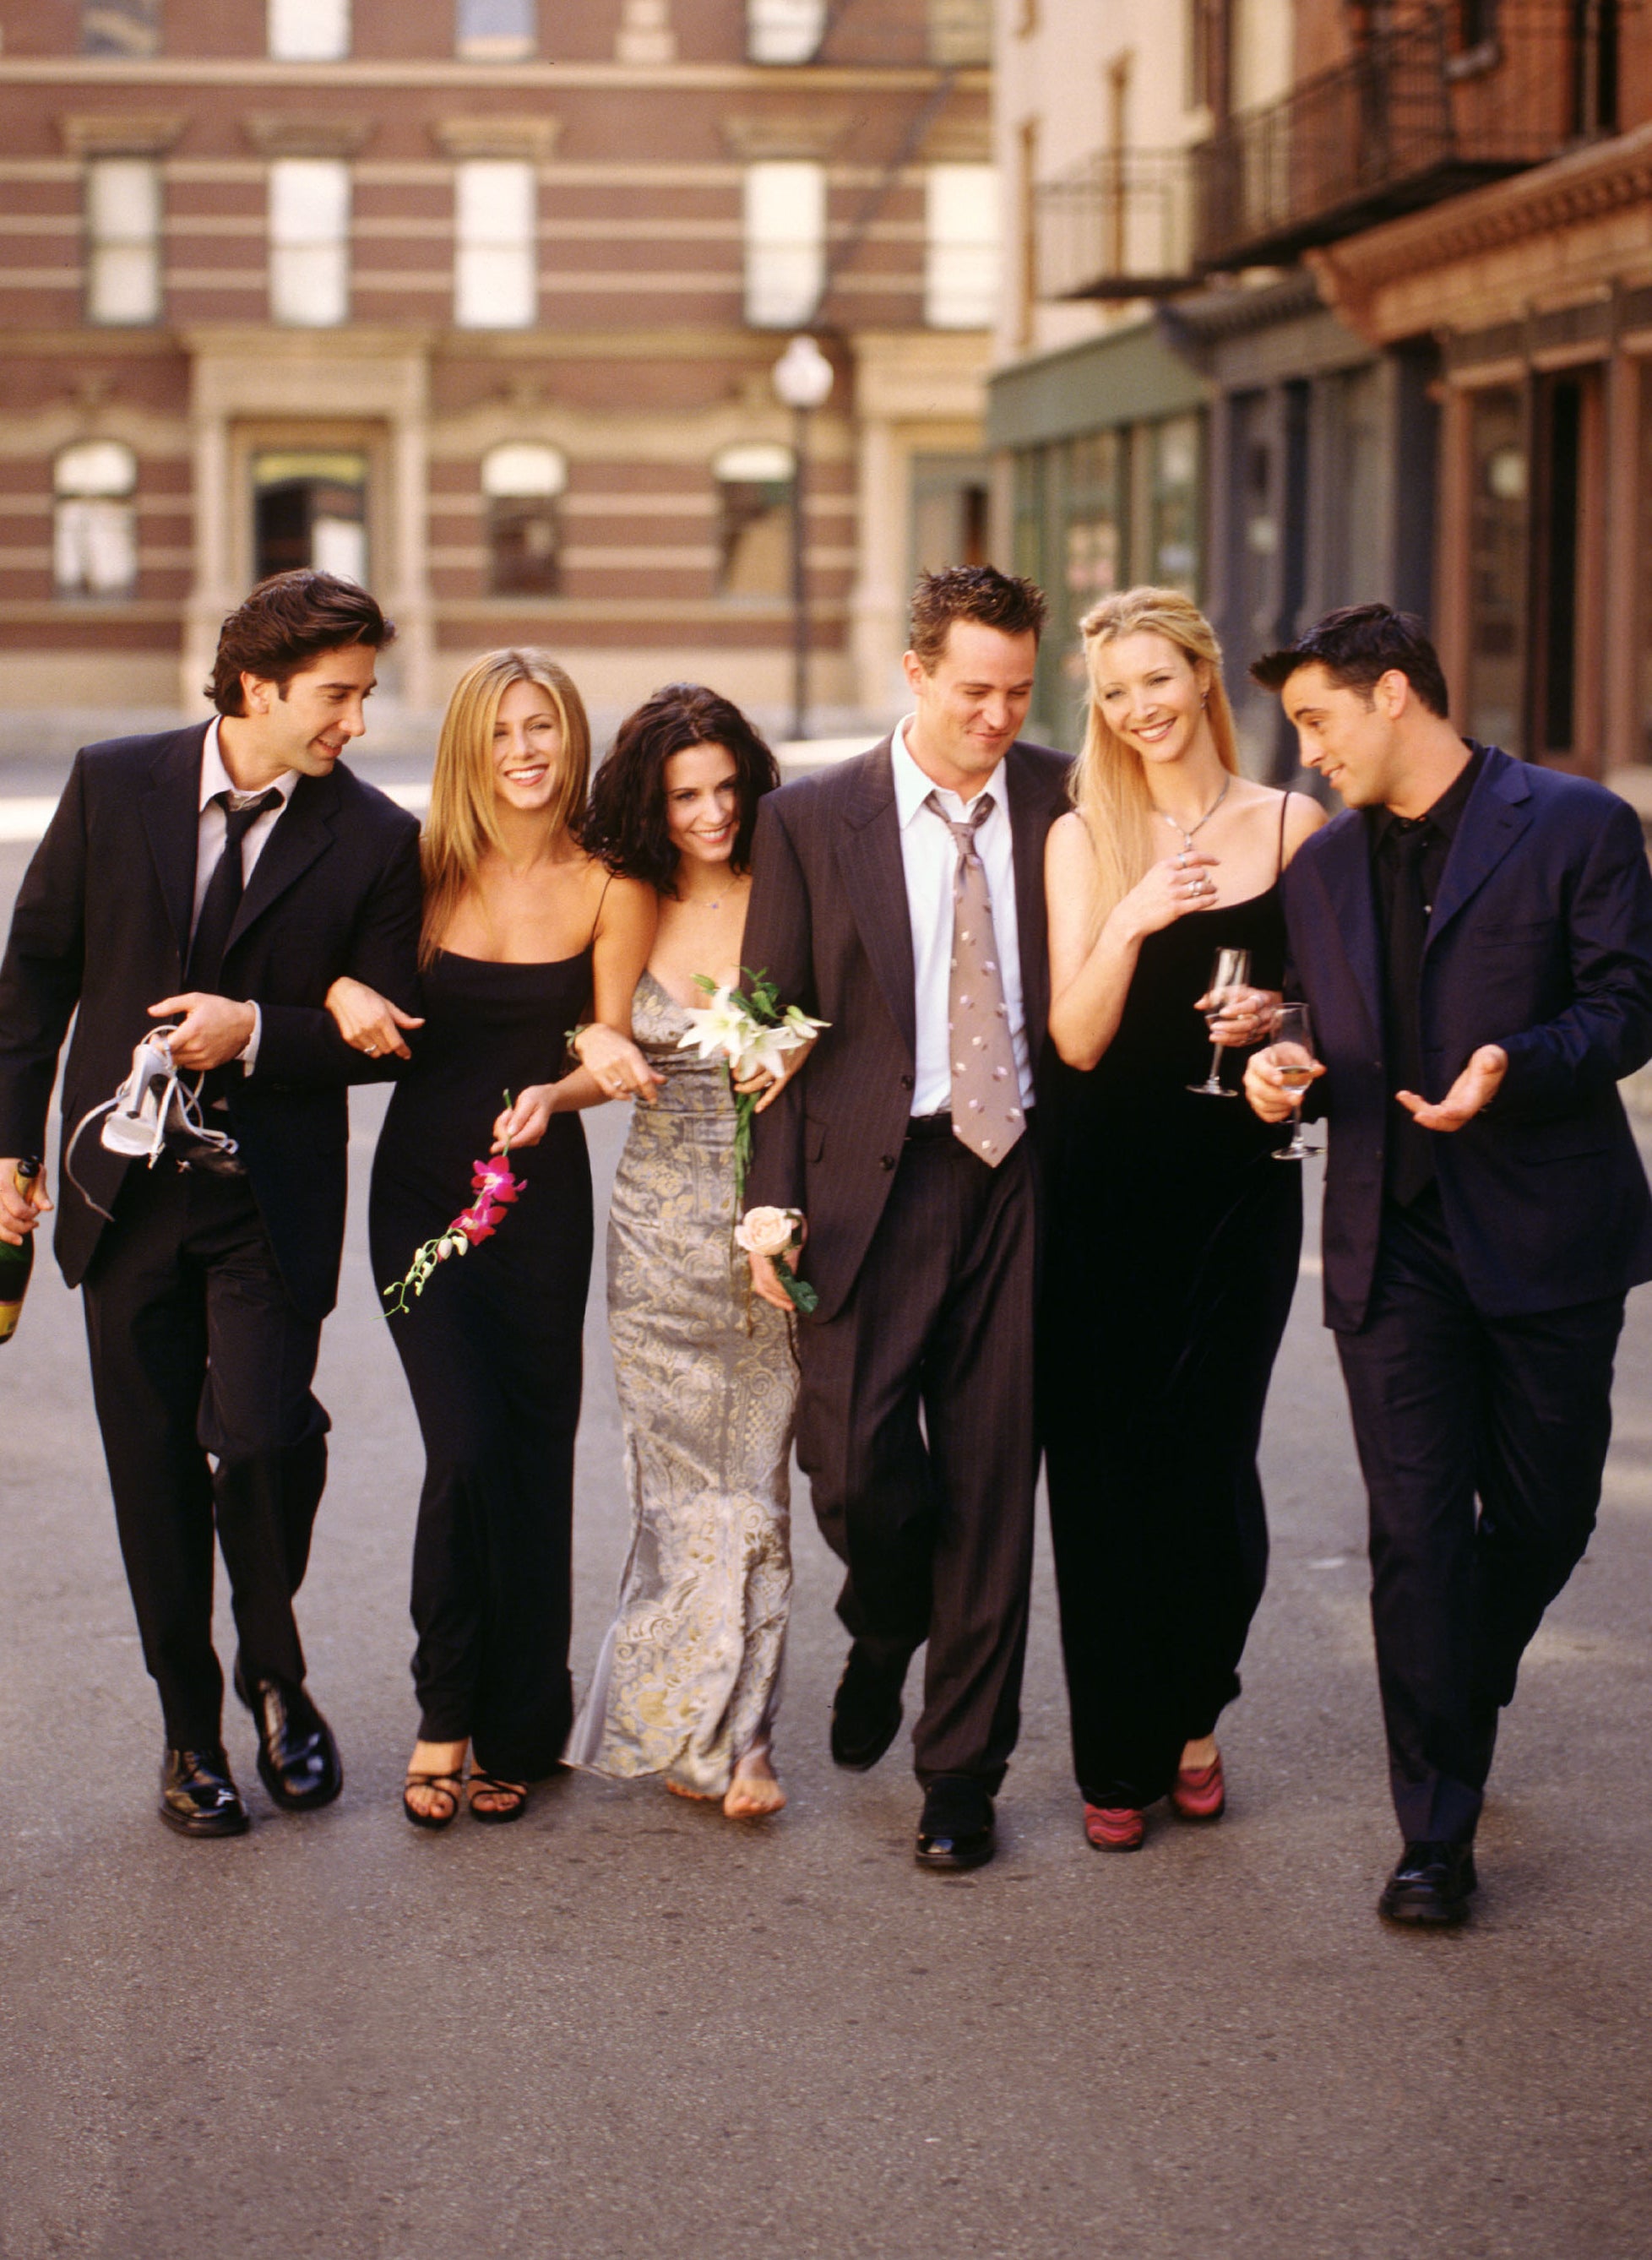 The costars in a scene walking together in the street